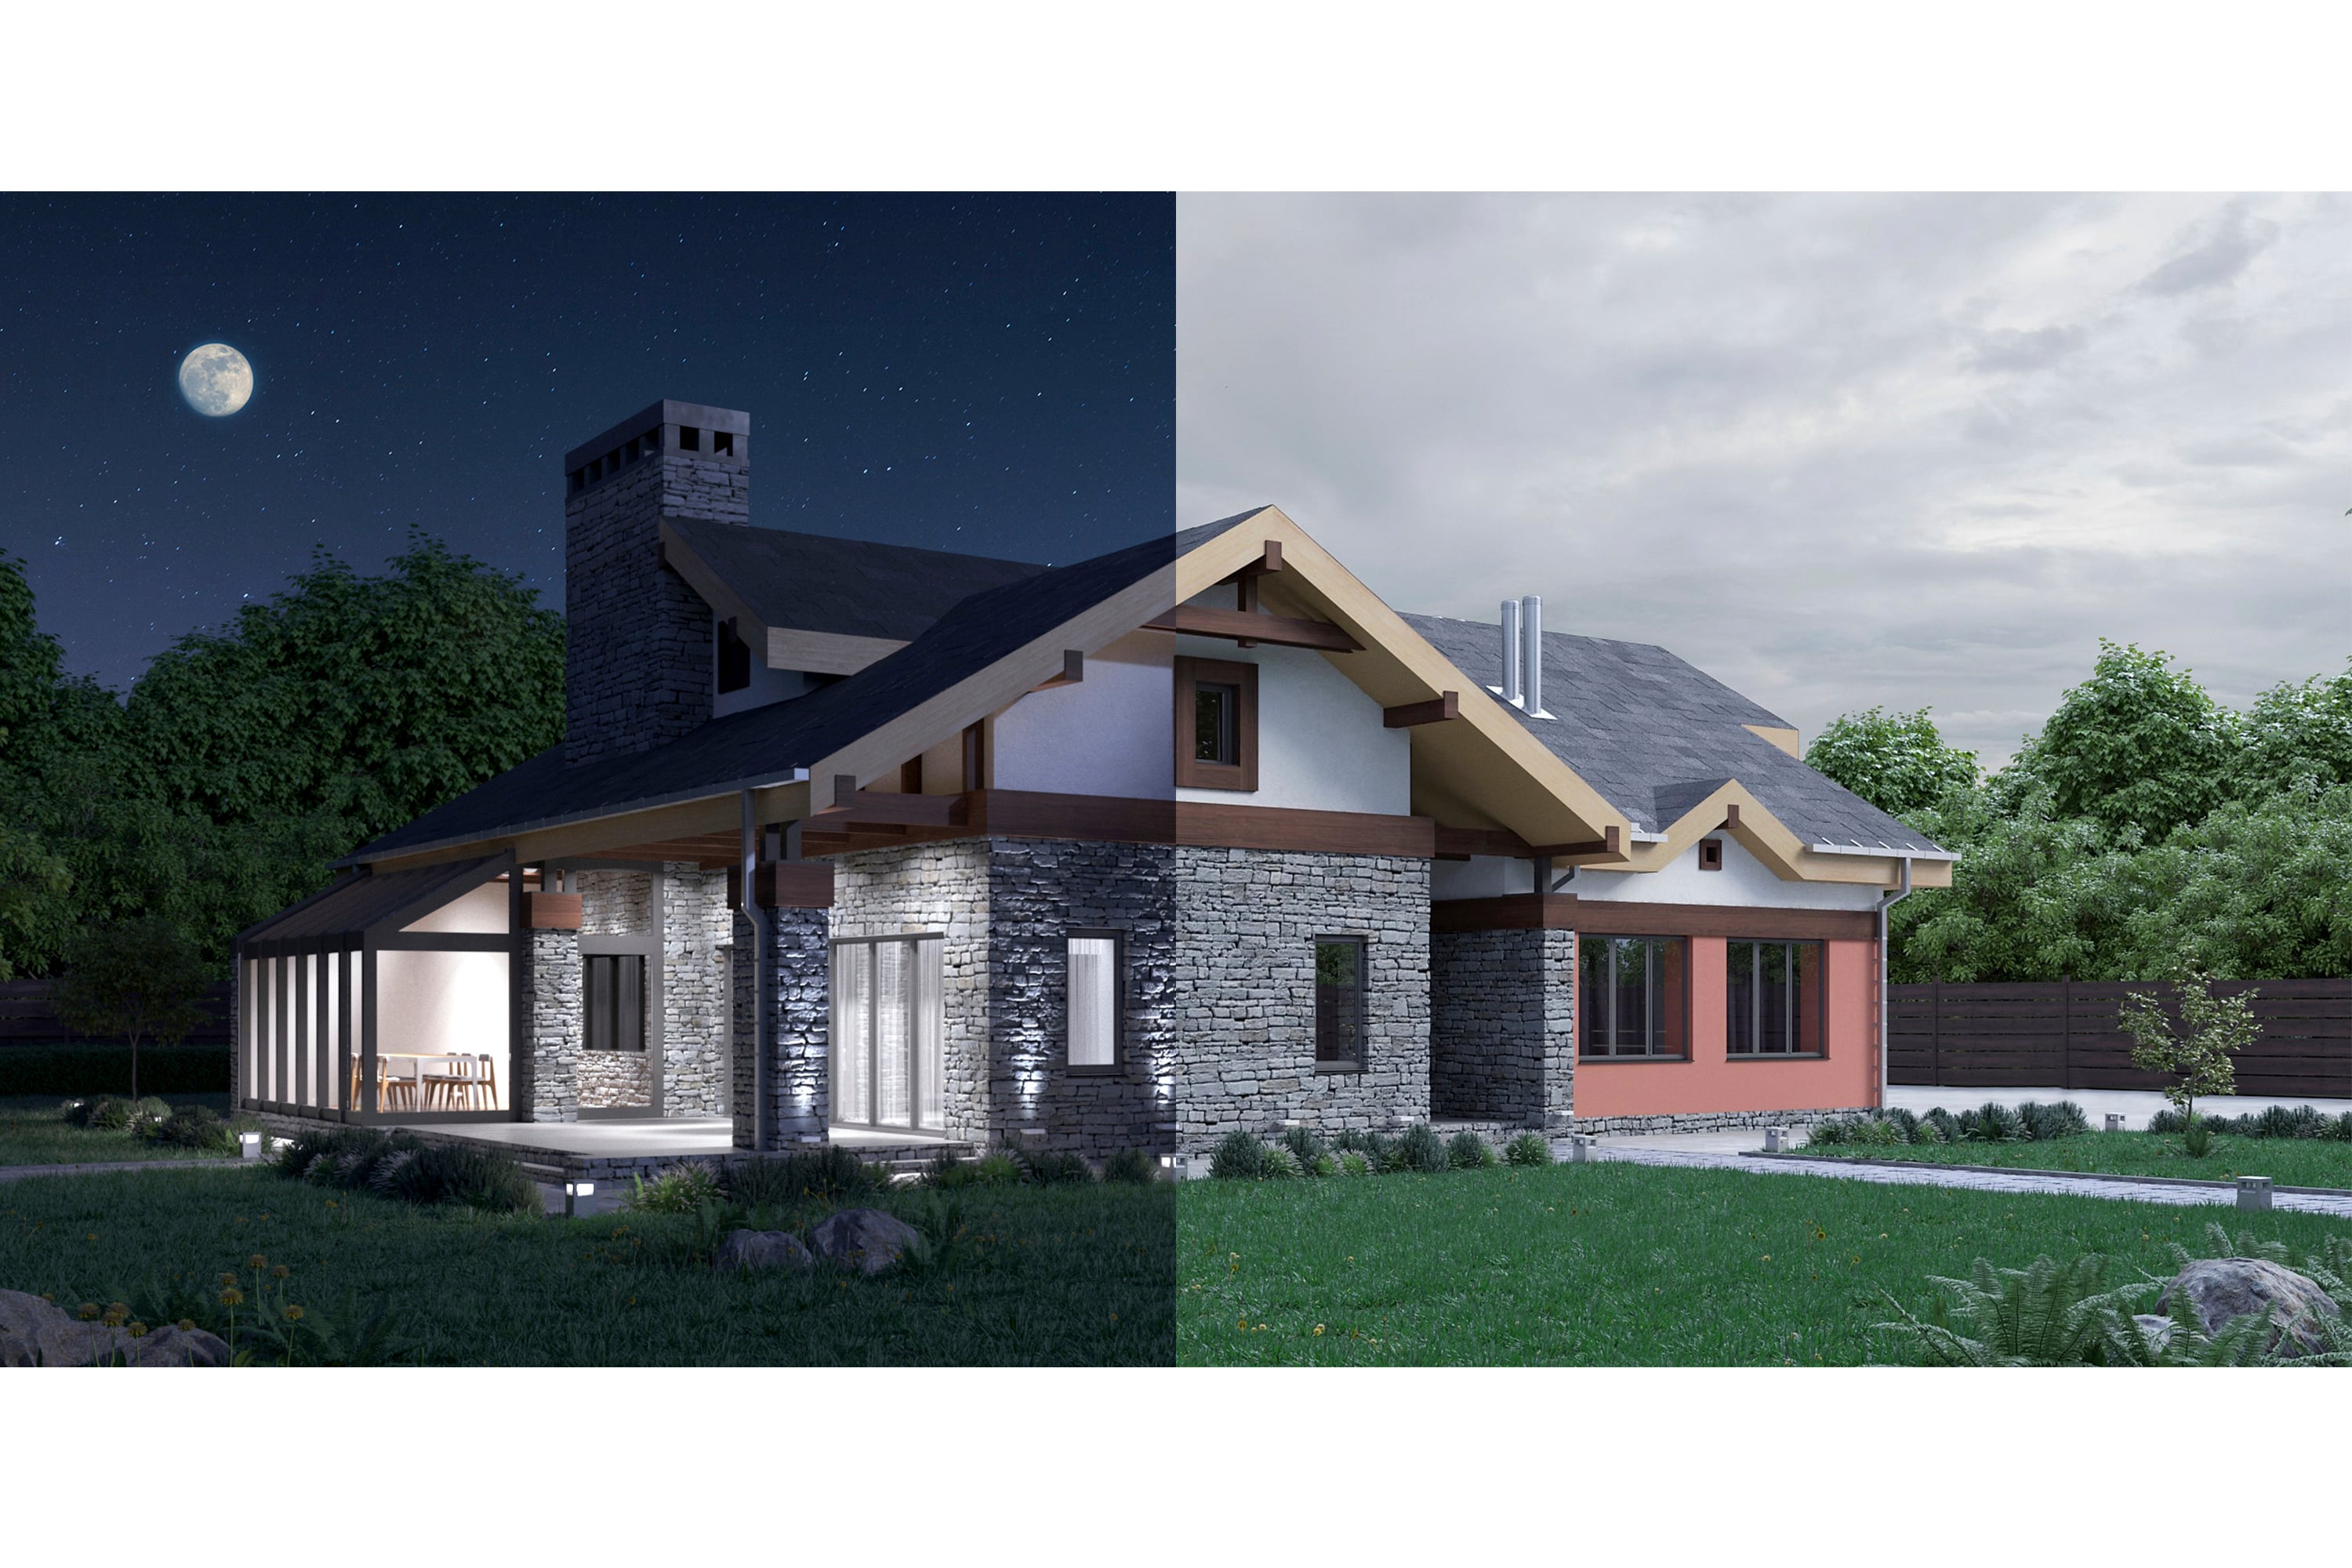 A visual composed of 2 separate photos of the same house, the left side is a photo of the house taken at night, the right side is taken during the day.